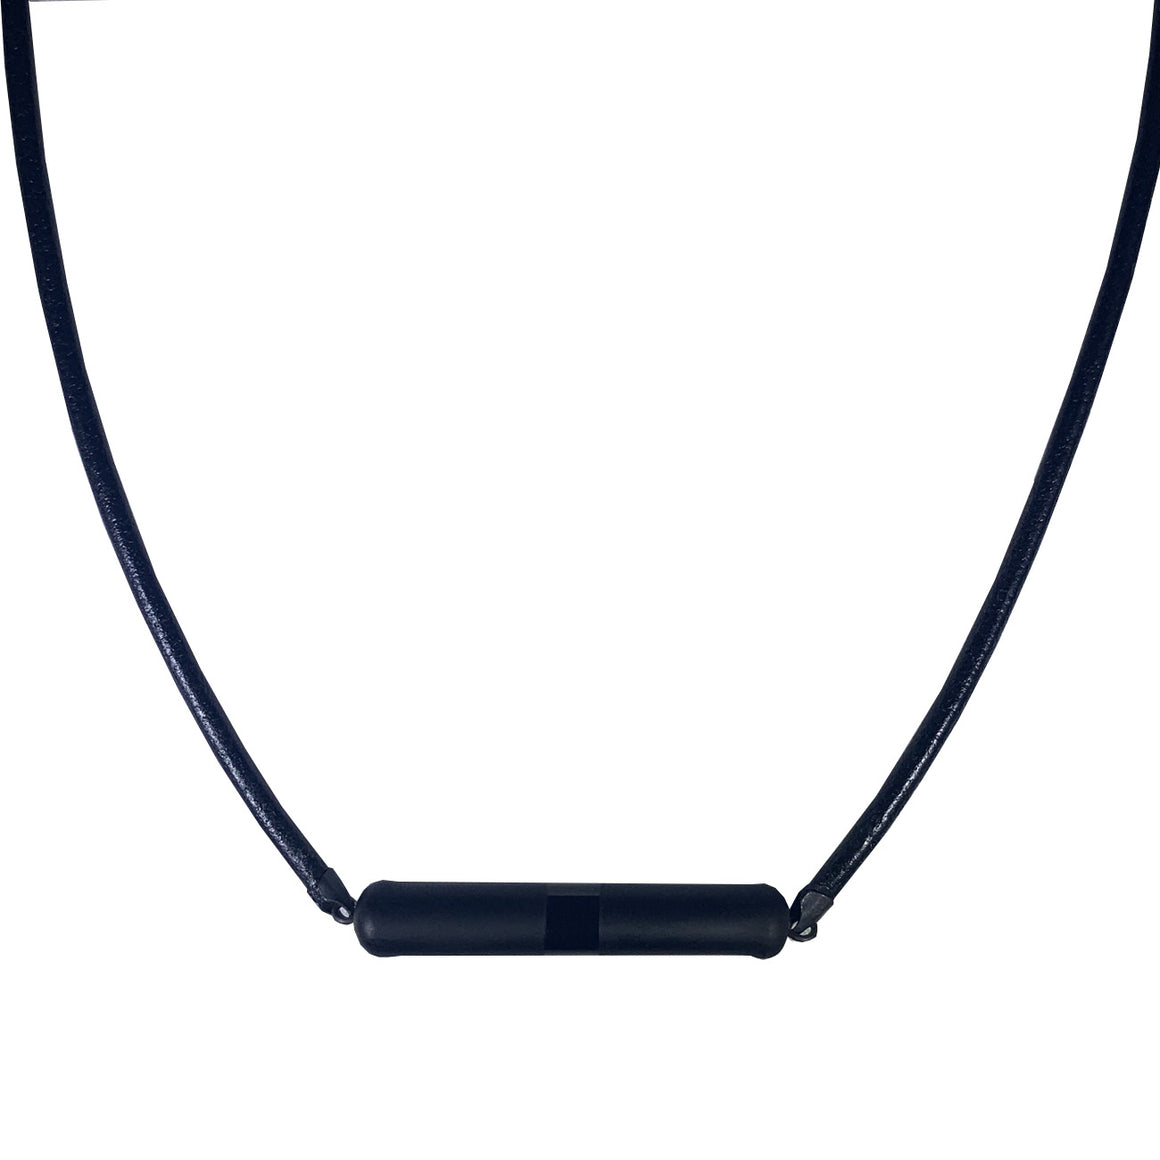 Two Toned Black Glass Necklace with Leather Cord